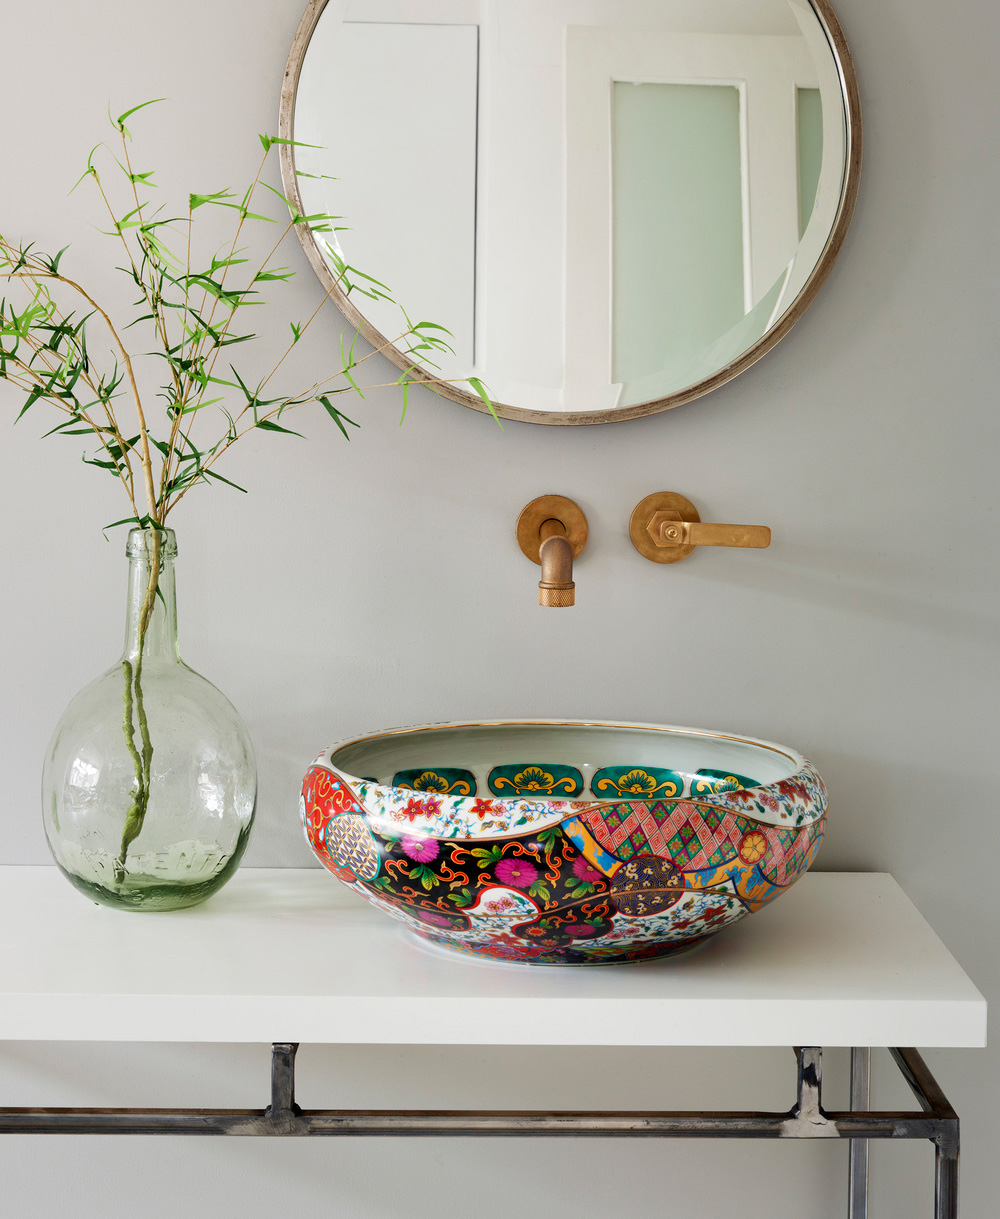 These stunning washbasins are designed by the London Basin Company. They have a range of diverse designs and they are all so deliciously tactile and curvaceous and make a real statement in the bathroom.